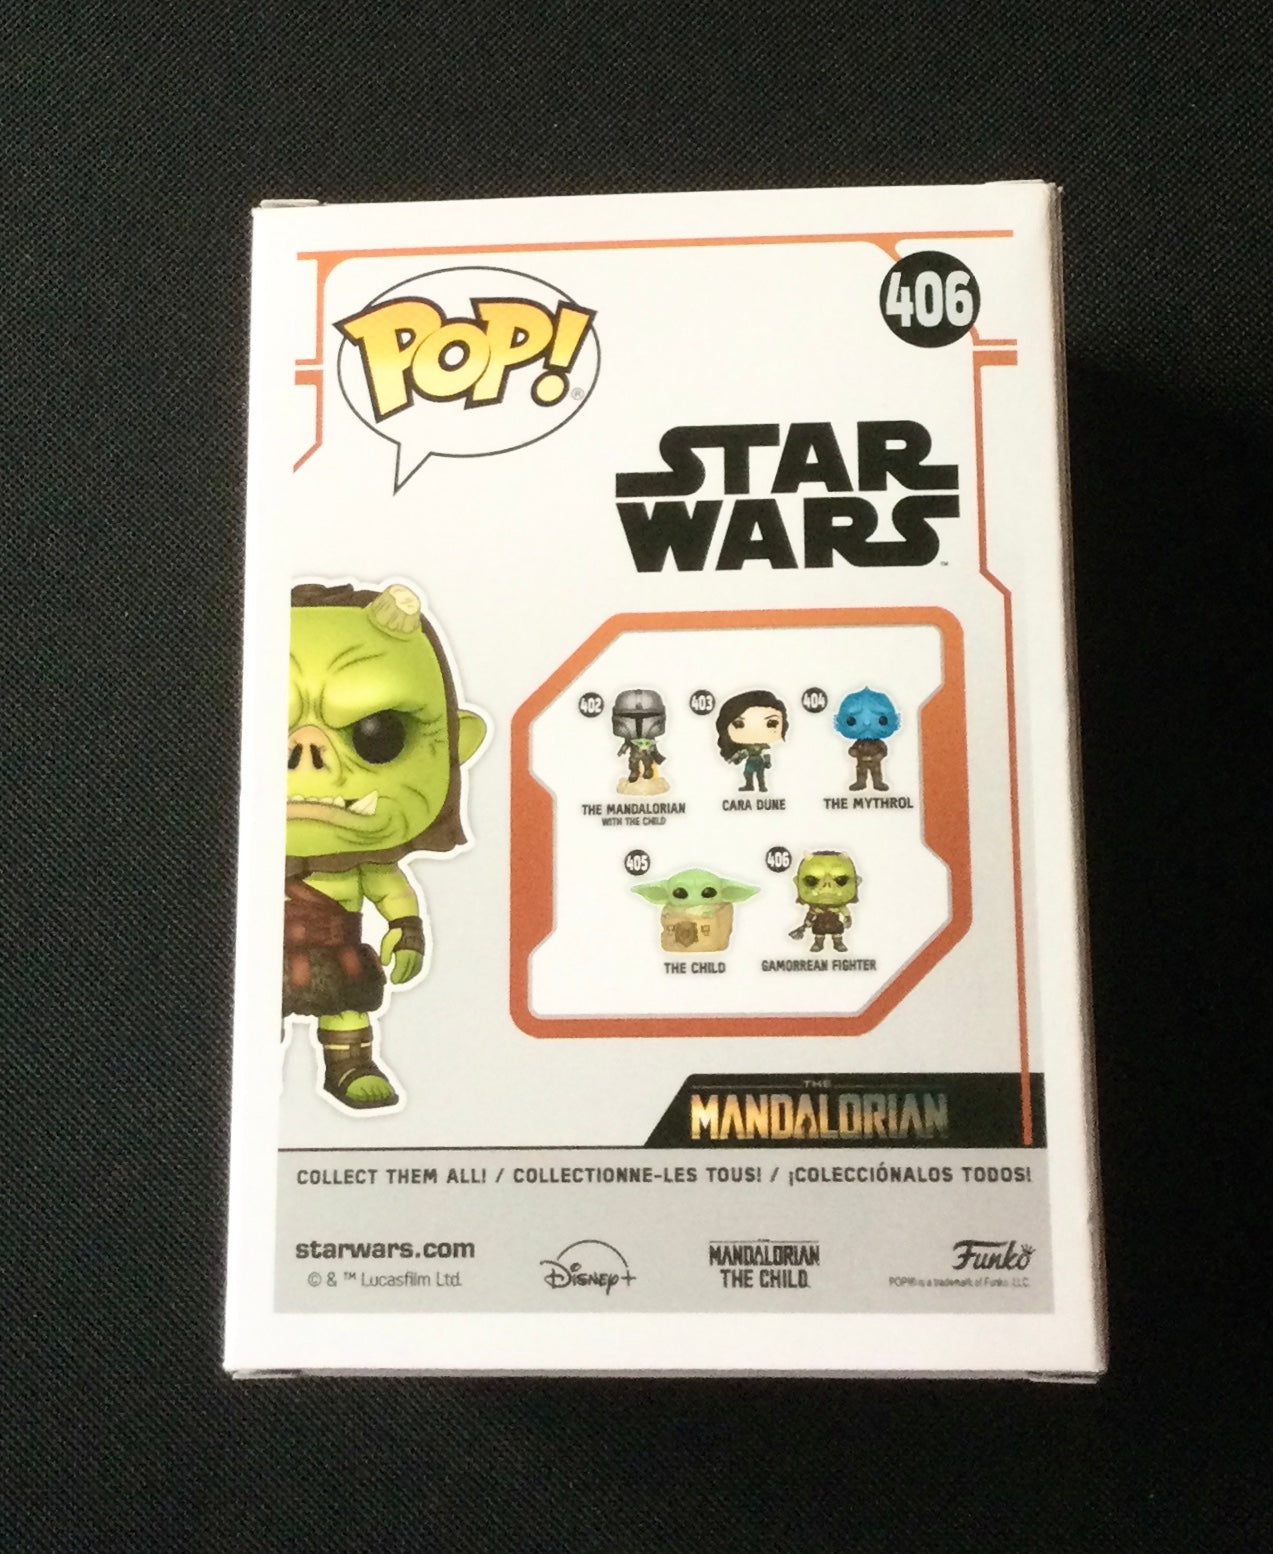 Star Wars Gamorrean Fighter Joe Gibson Autographed 406 Funko POP! with Triple Layer Authenticity